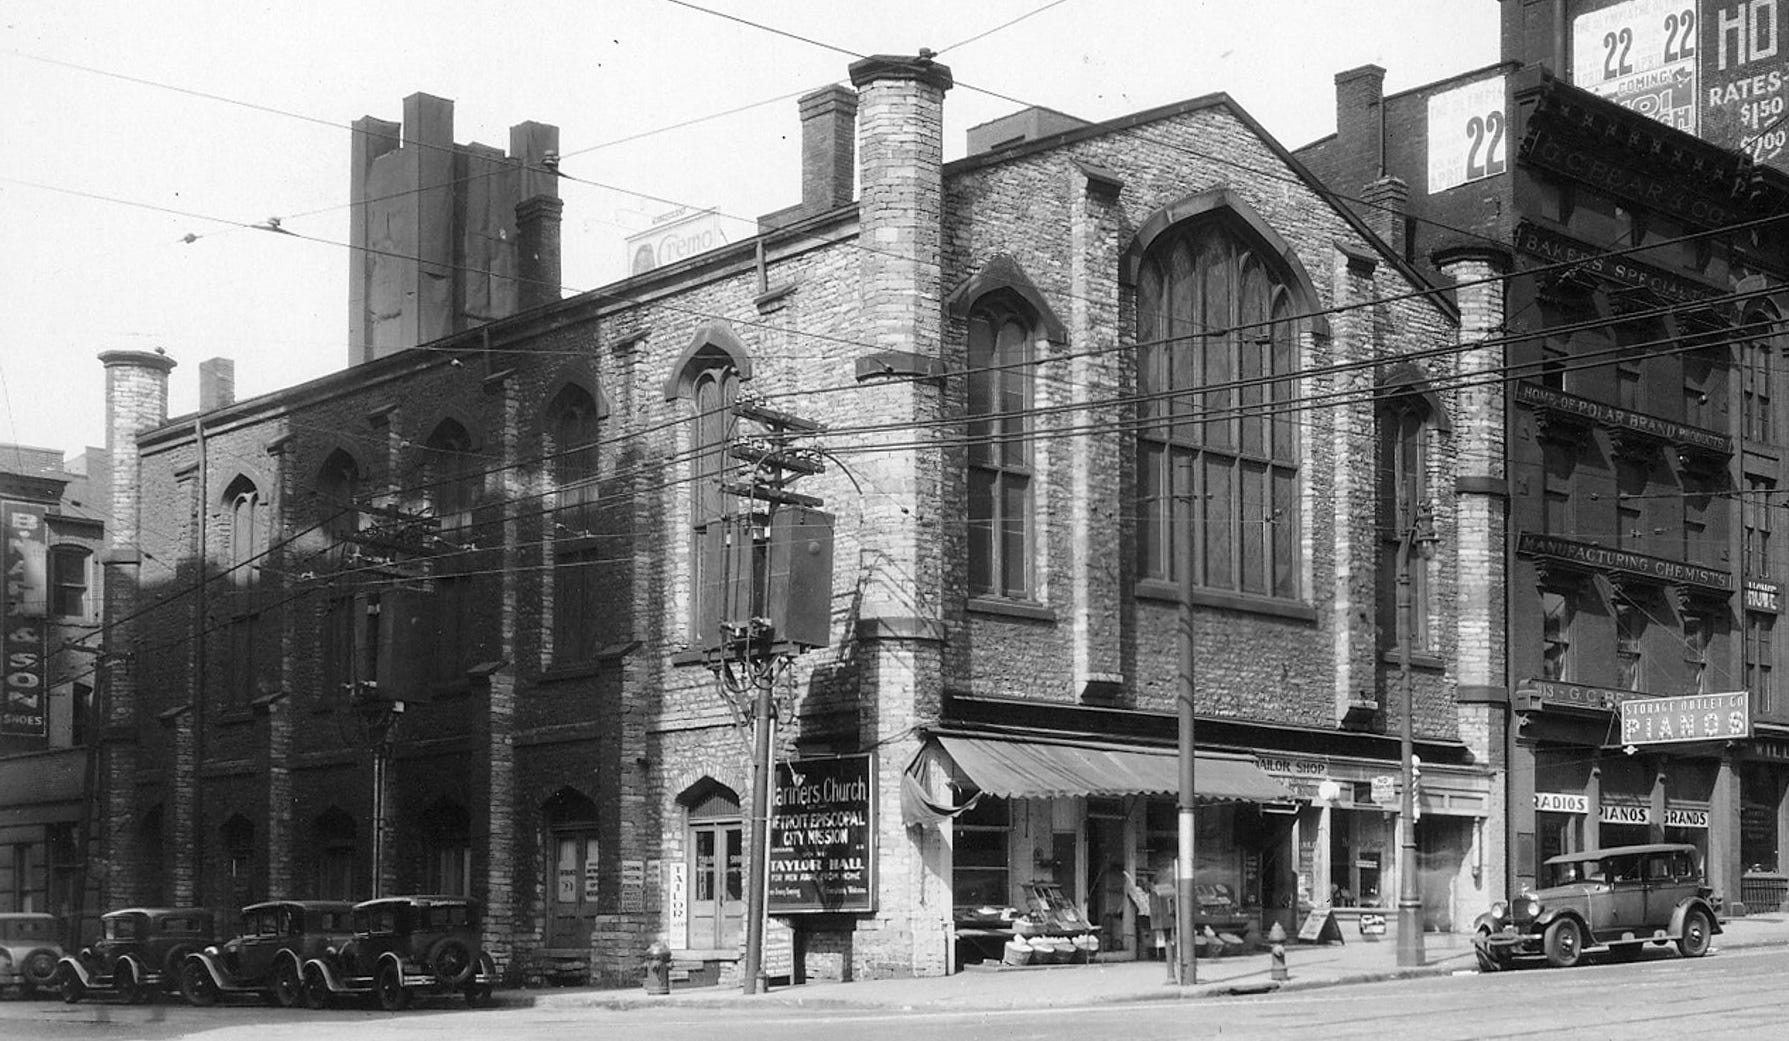 Mariners Church, the Detroit Episcopal City Mission and Taylor Hall for Men Away from Home sat on Woodward on the site now occupied by Hart Plaza in 1934.